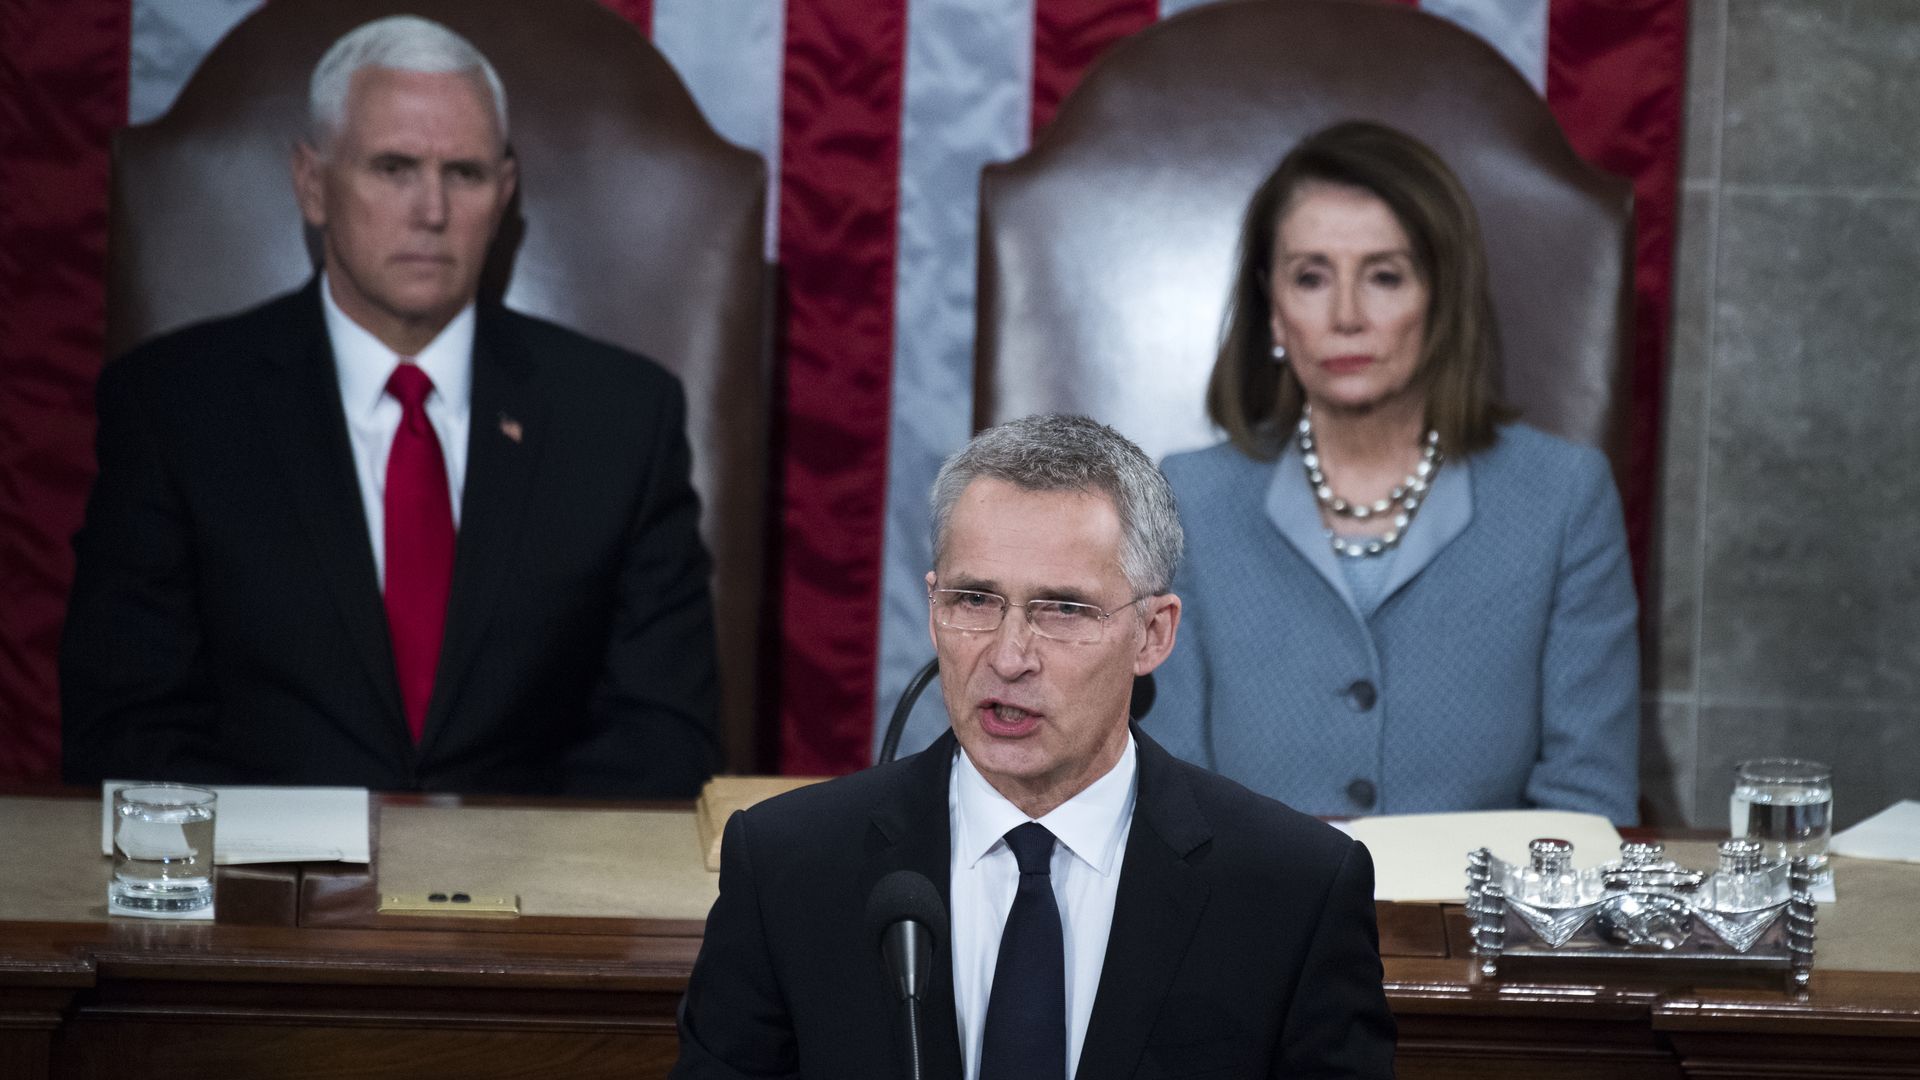 Jens Stoltenberg addressing Congress, with Nancy Pelosi and Mike Pence seated behind him